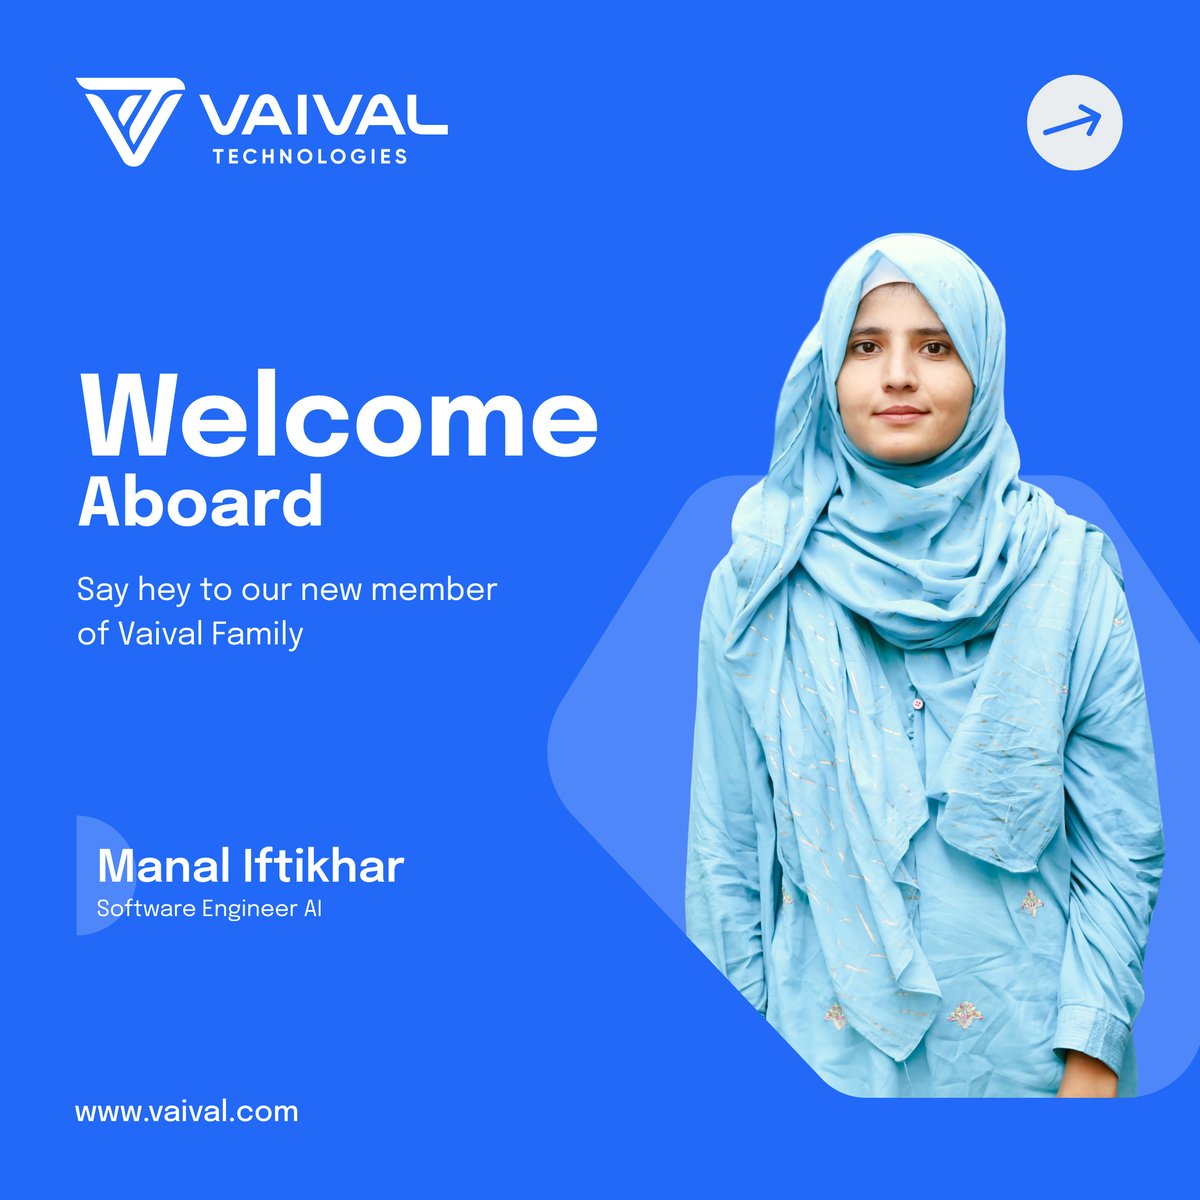 We are thrilled to announce the newest addition to our team: Manal Iftikhar, who joins us as a Software Engineer AI.

In her new role at Vaival Technologies LLC, Manal will be working on developing and implementing AI solutions to improve our products and services. 
 
#NewHiring